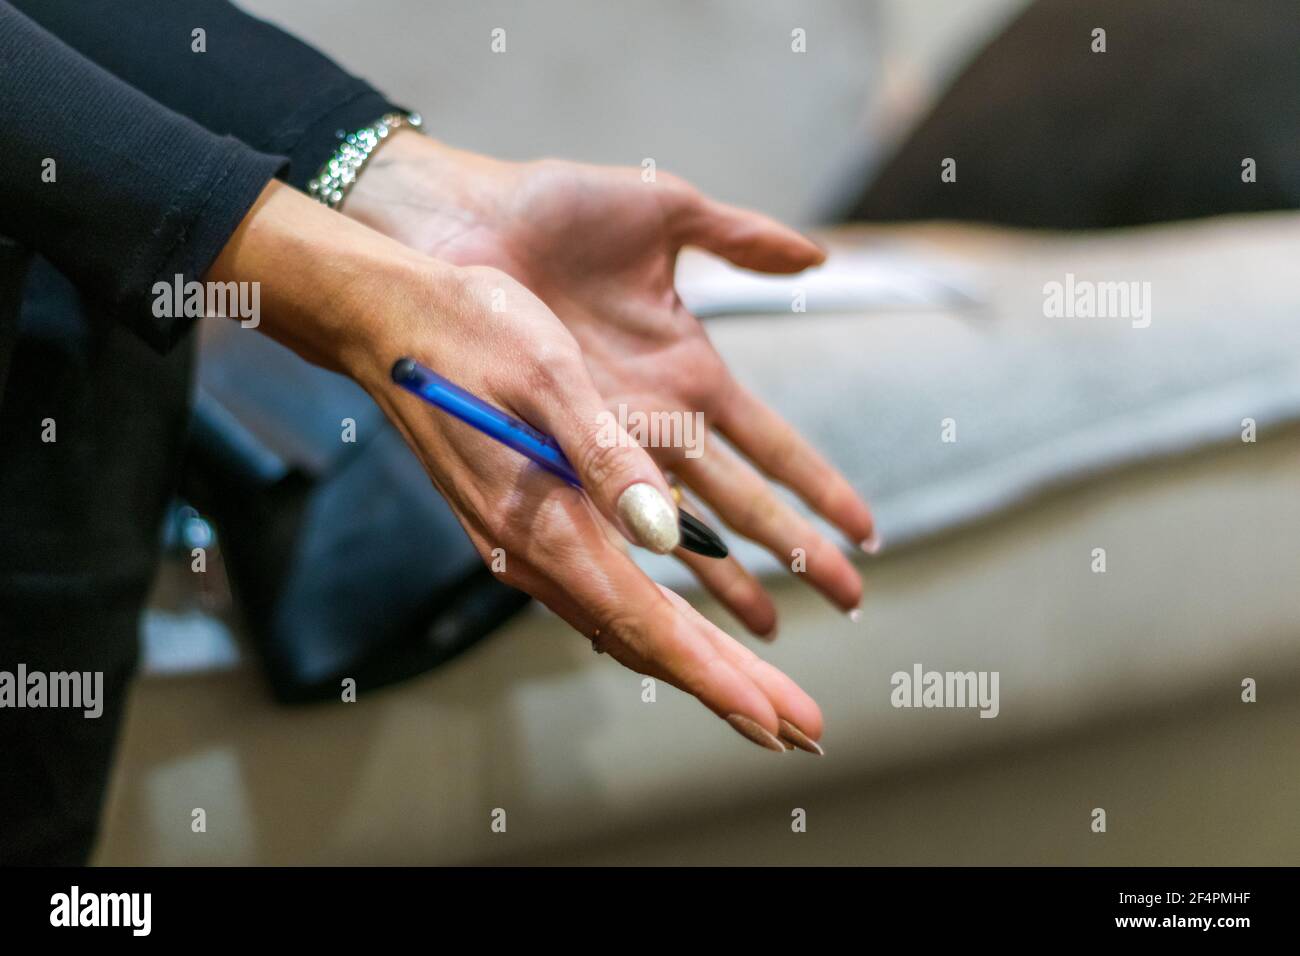 Women's world, women explaining or teaching with a pen in the  right hand. Women showing knowledge to someone, leadership. Stock Photo